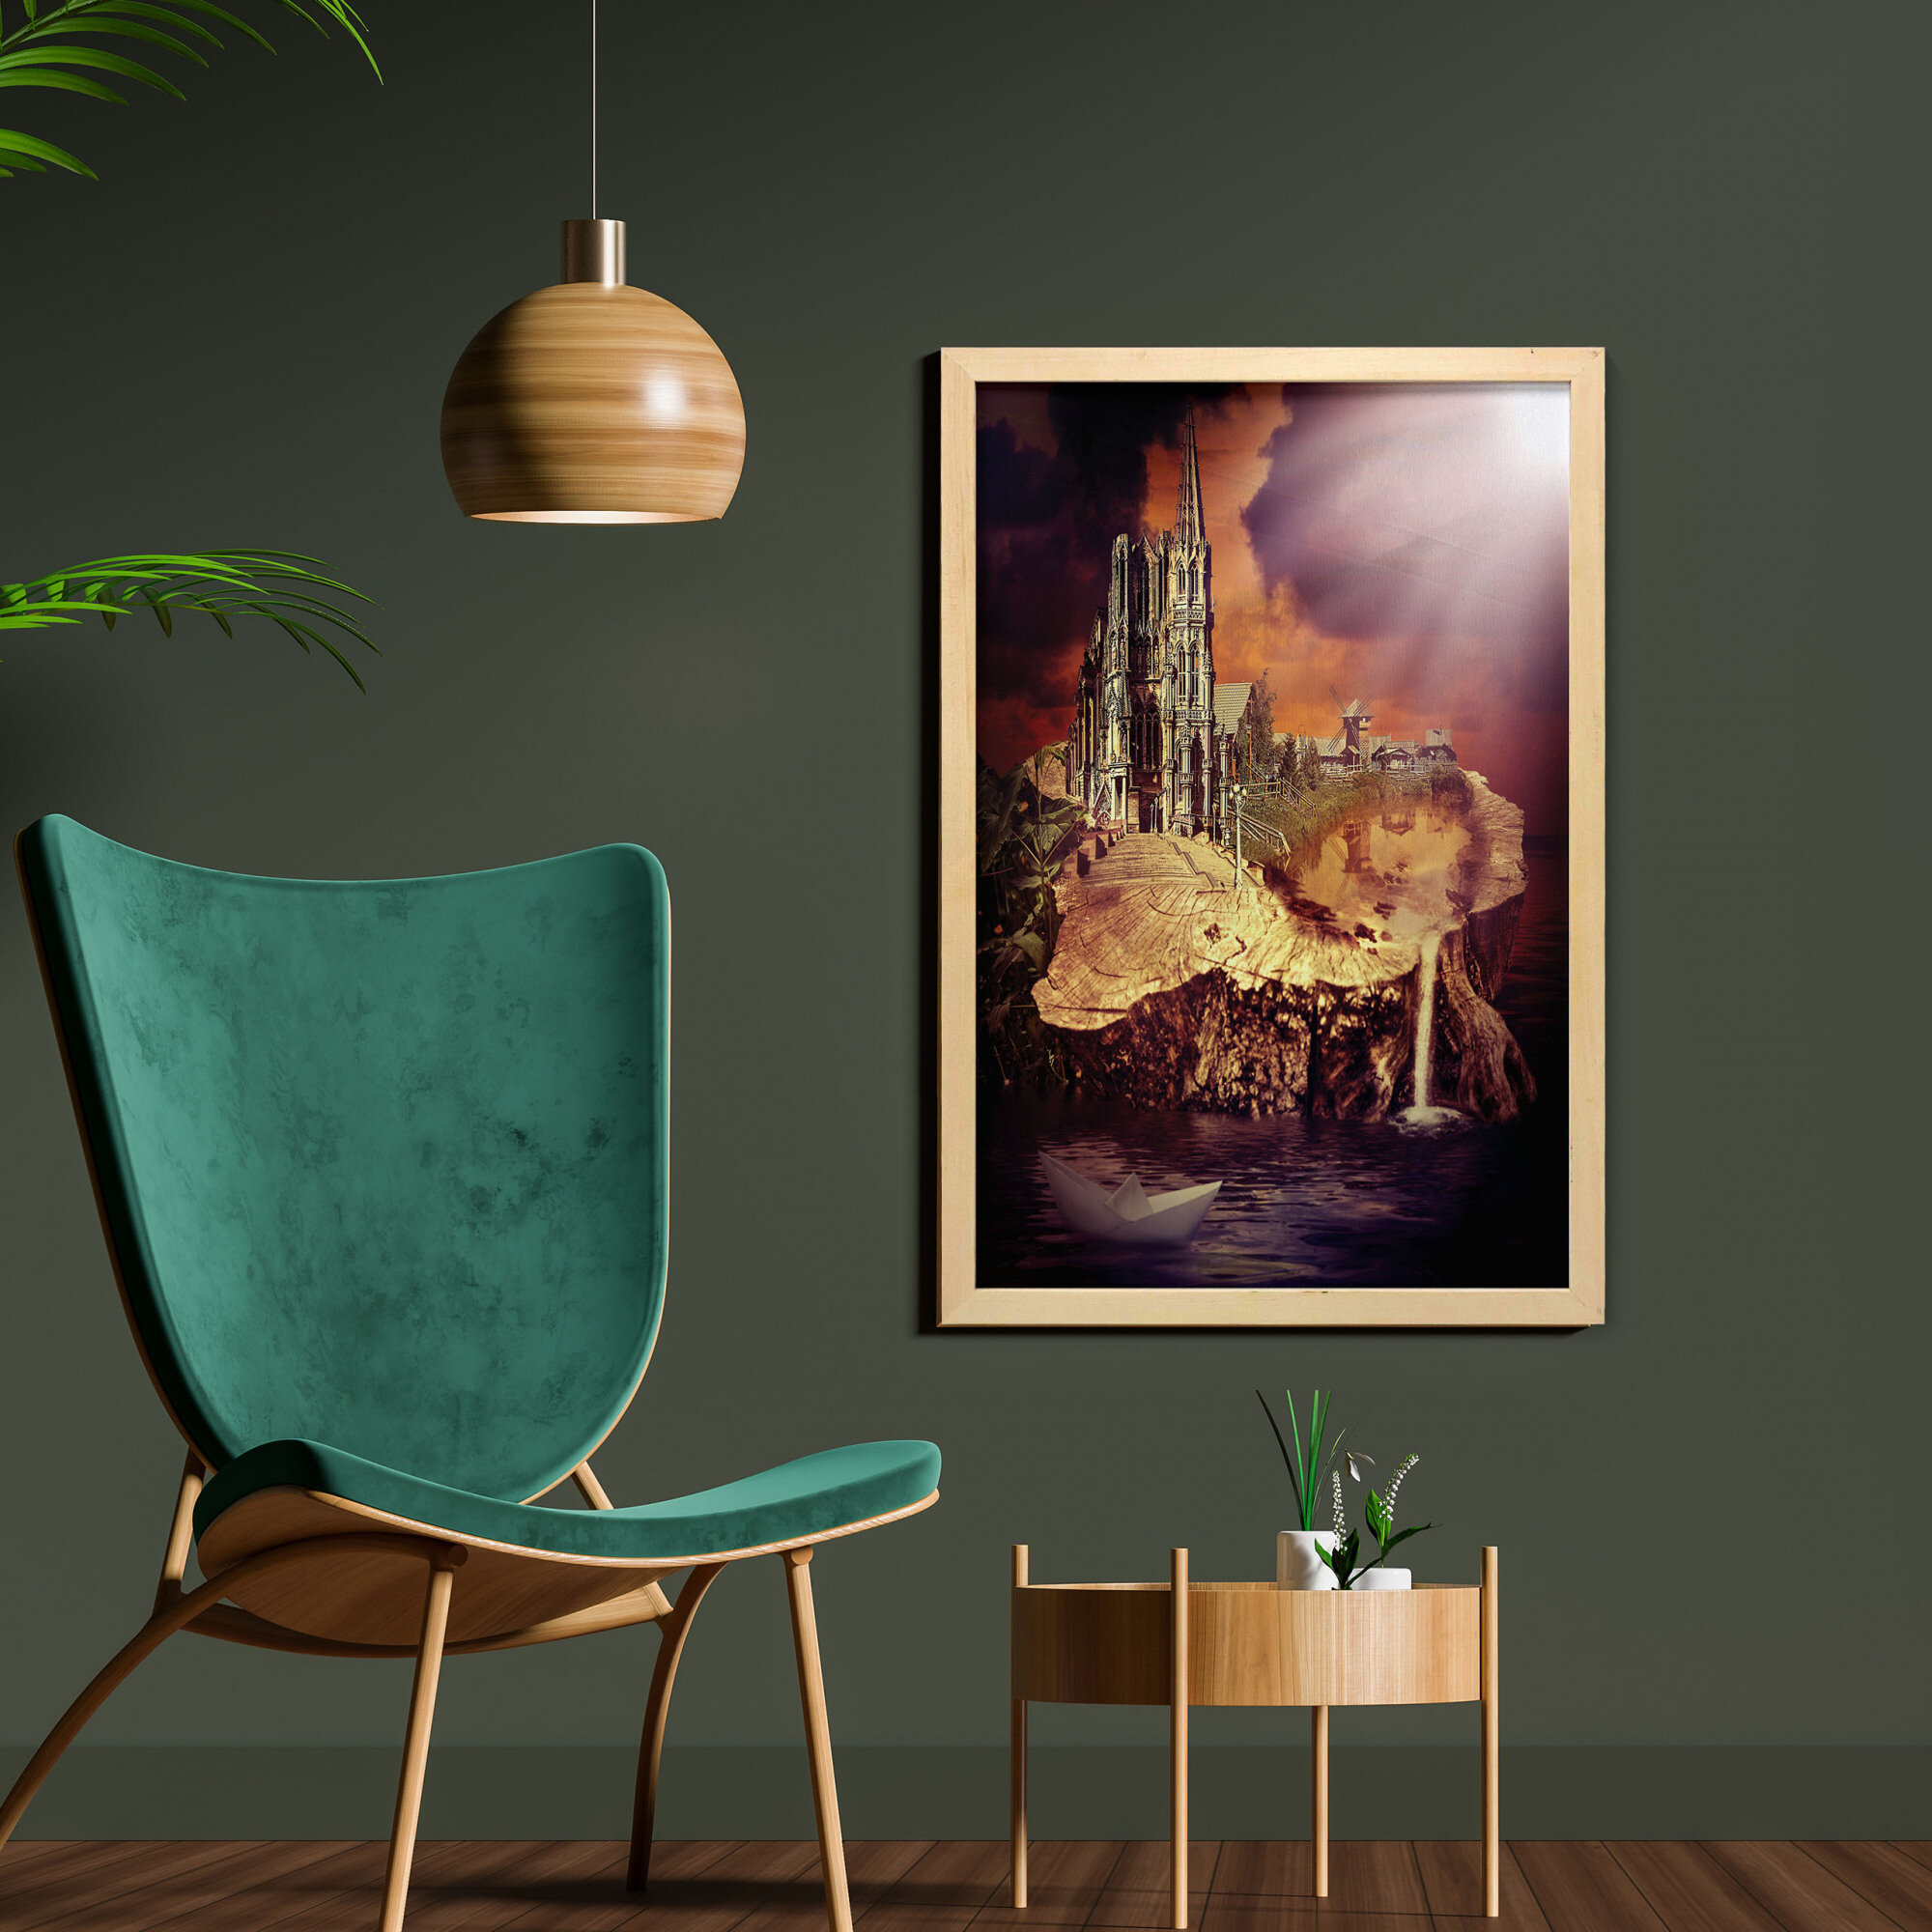 Fantasy Forest Village Print - Tranquil Streamside Hamlet Art - Perfect for  Fantasy Lovers and Peaceful Home Decor